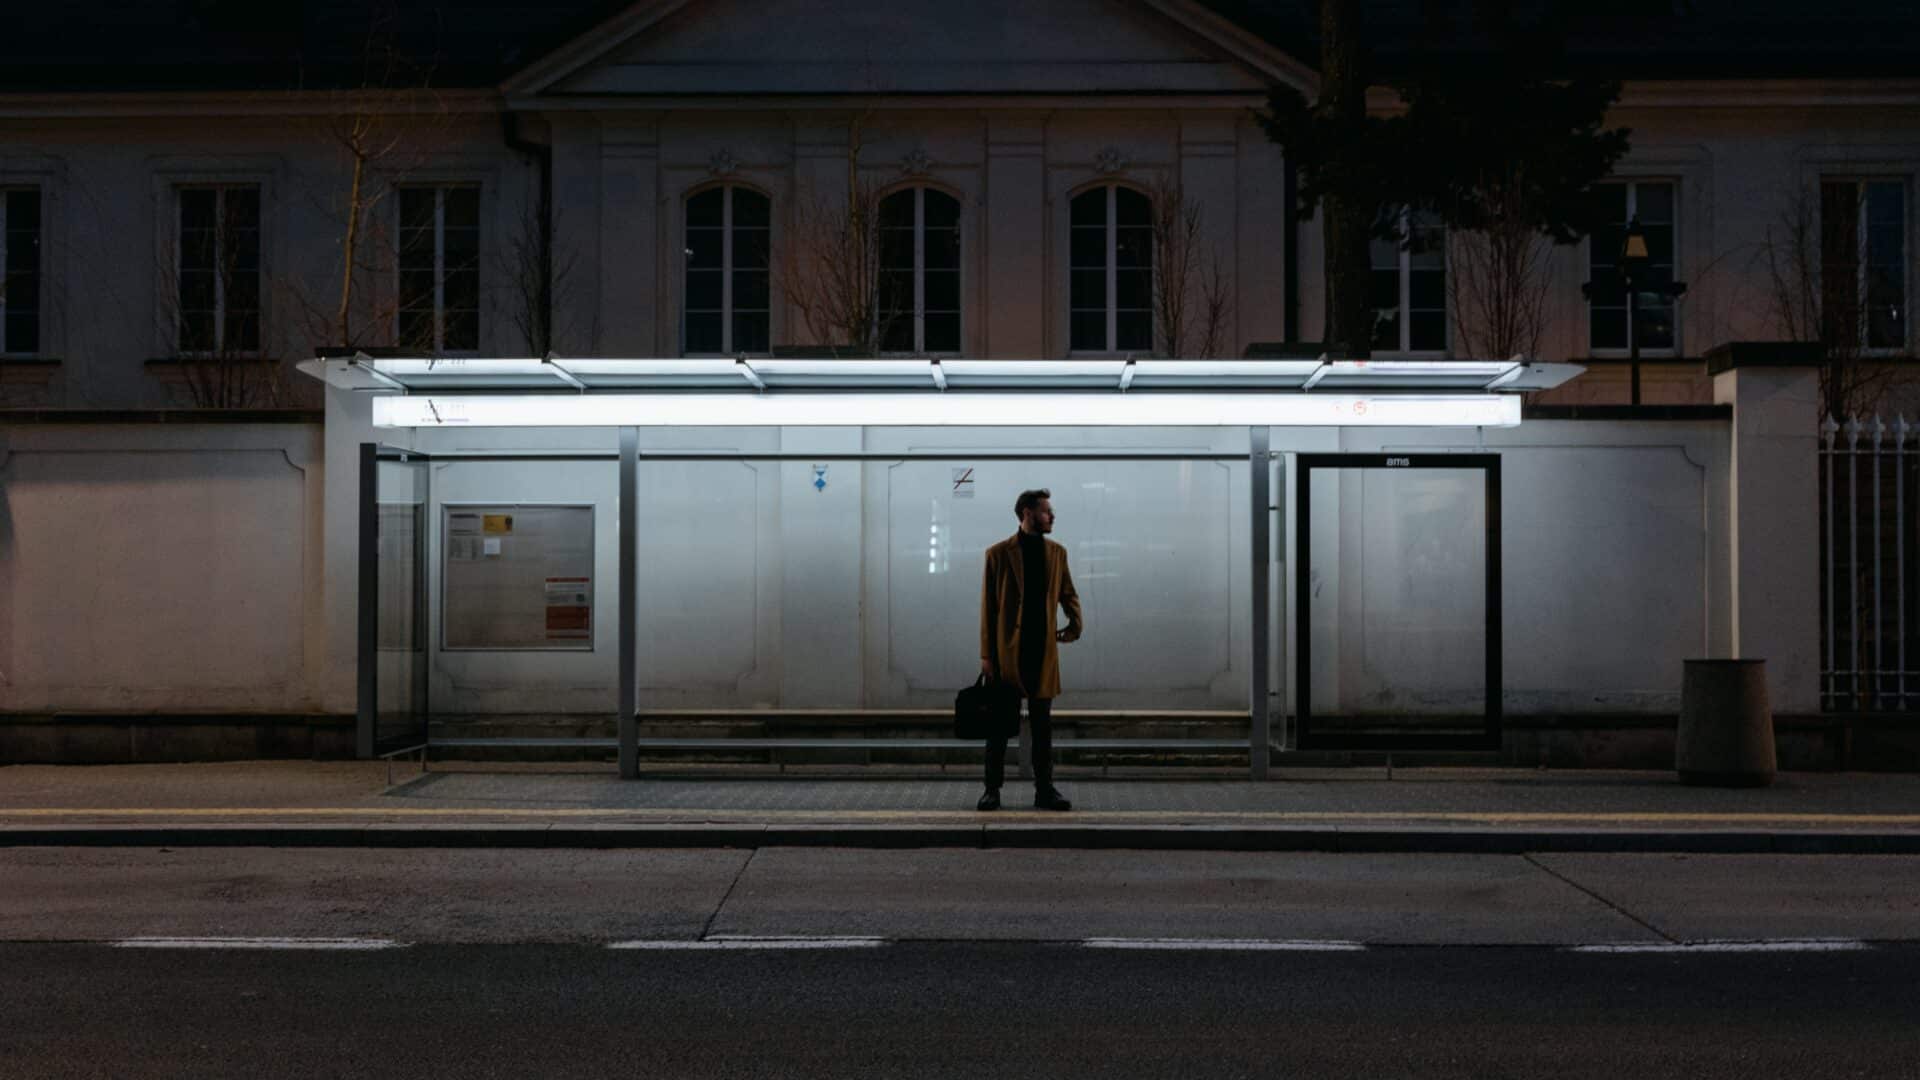 A man standing alone at a bus stop in the dark. The bus stop is some light.